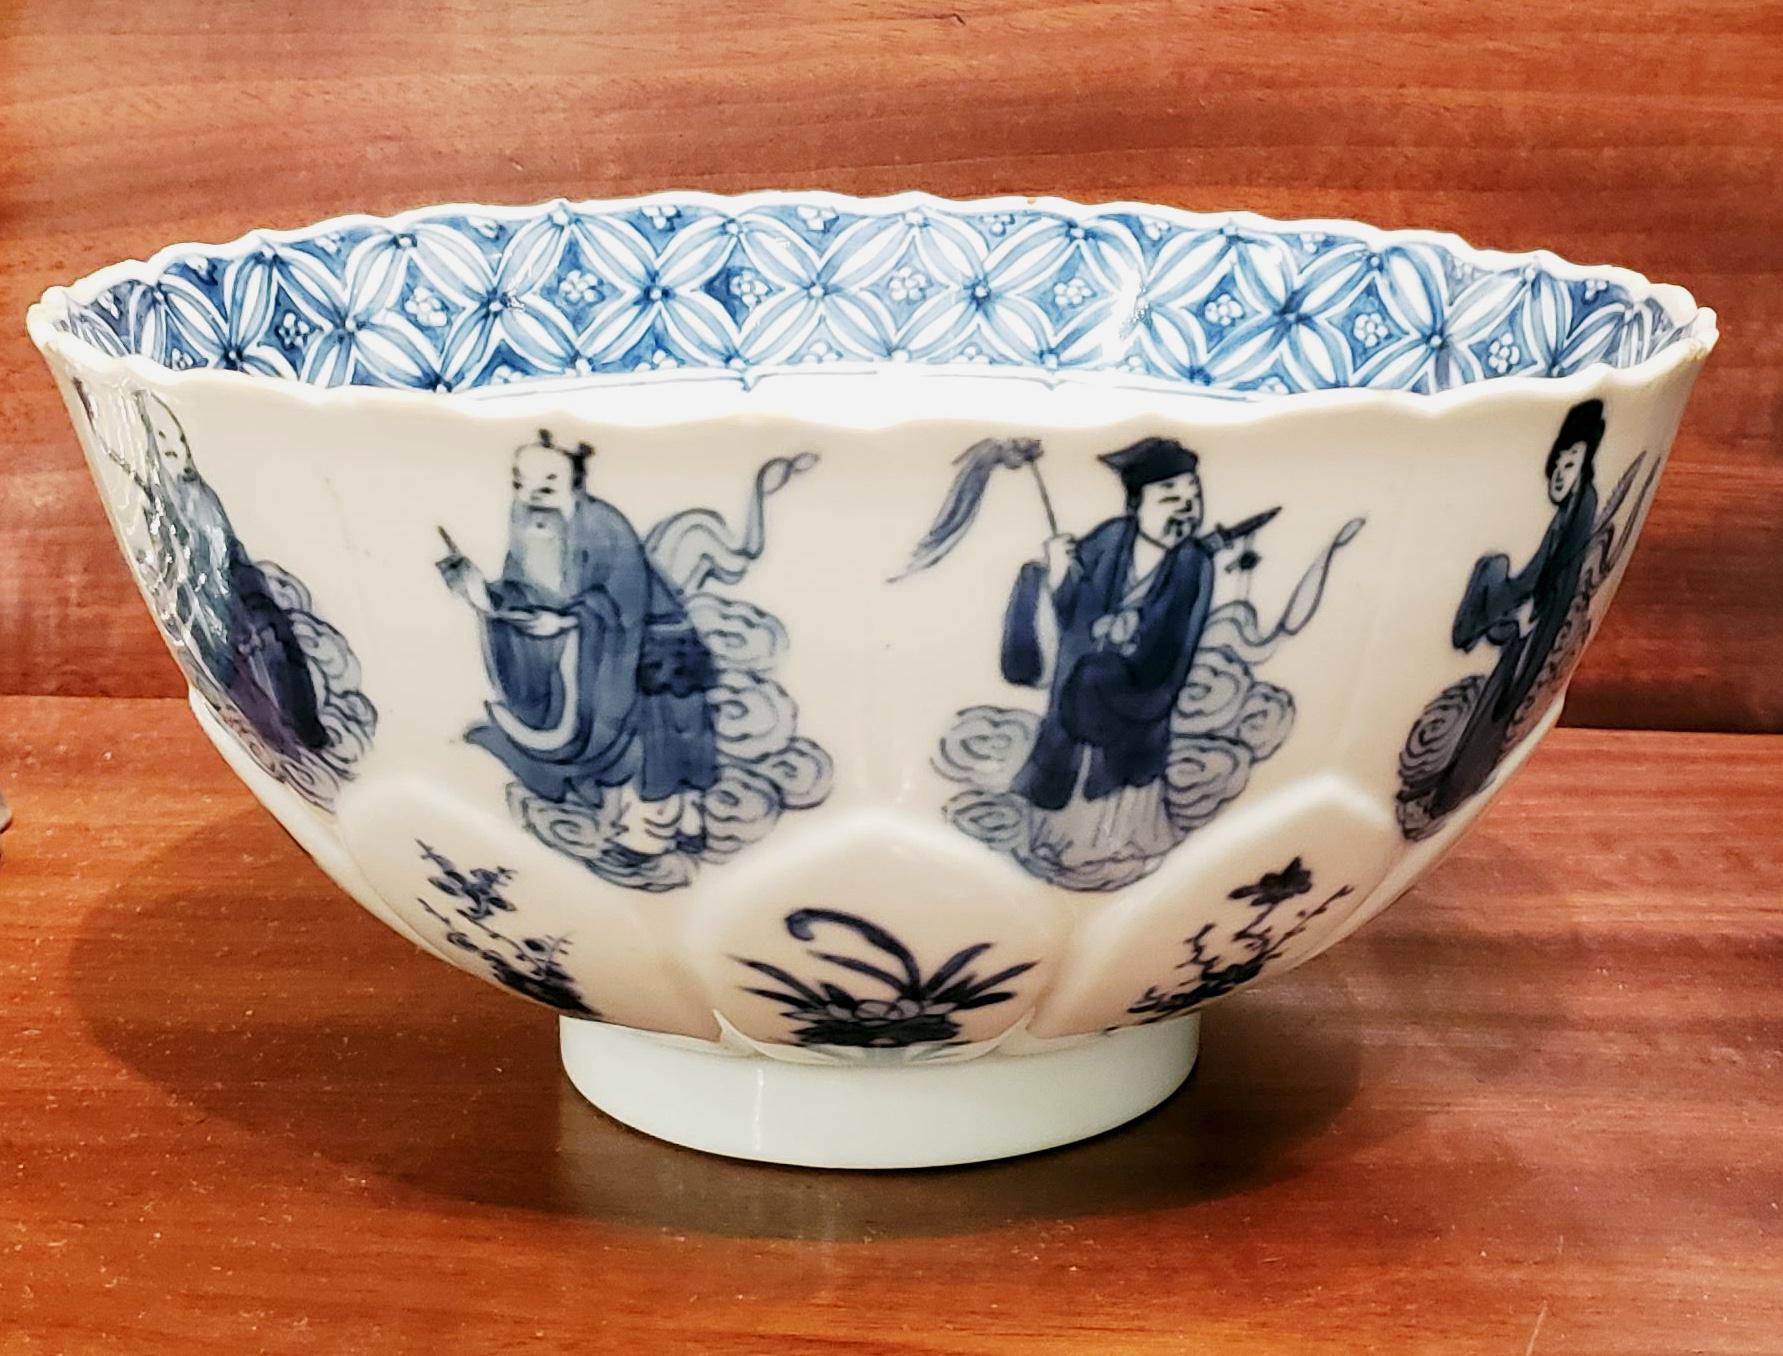 18th Century Kangxi Period Chinese Blue and White Porcelain Bowl, The Immortals & Four Gods